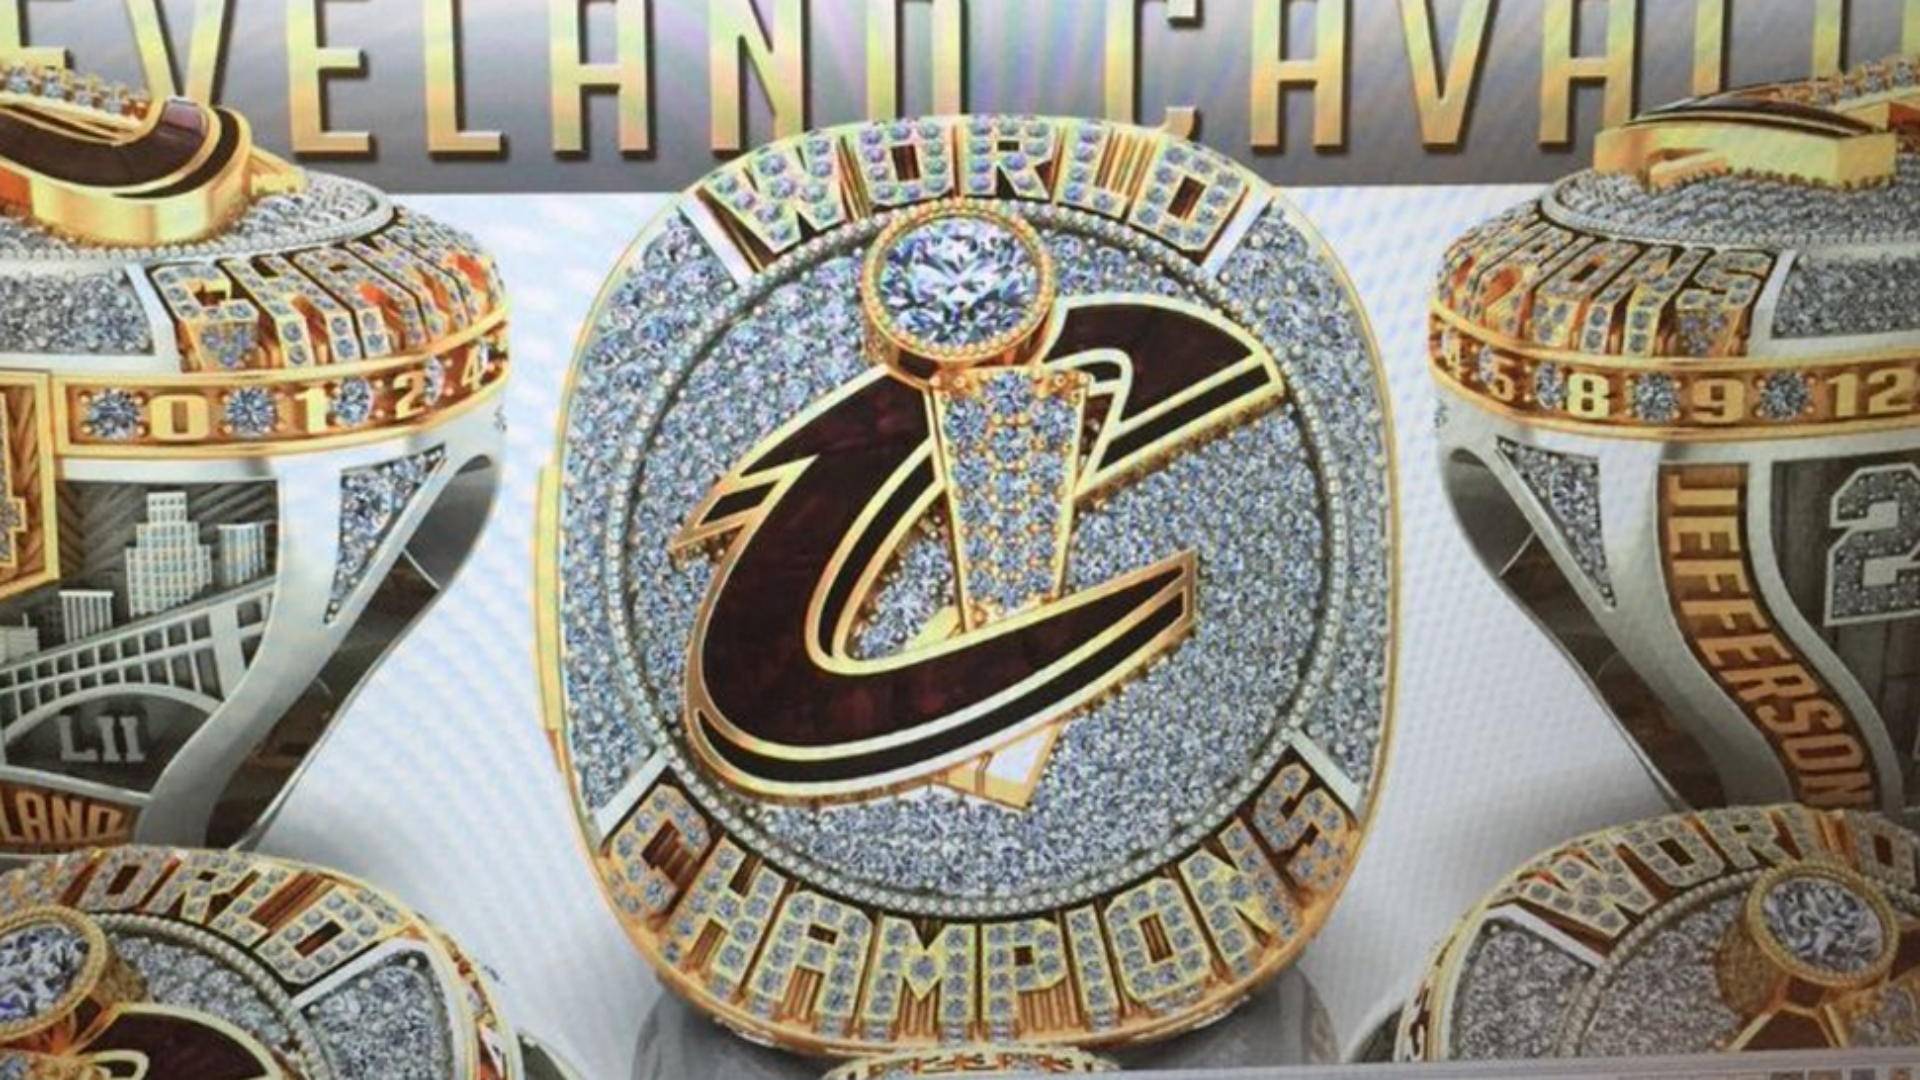 Take A Look At The Cavaliers Championship Rings Nba